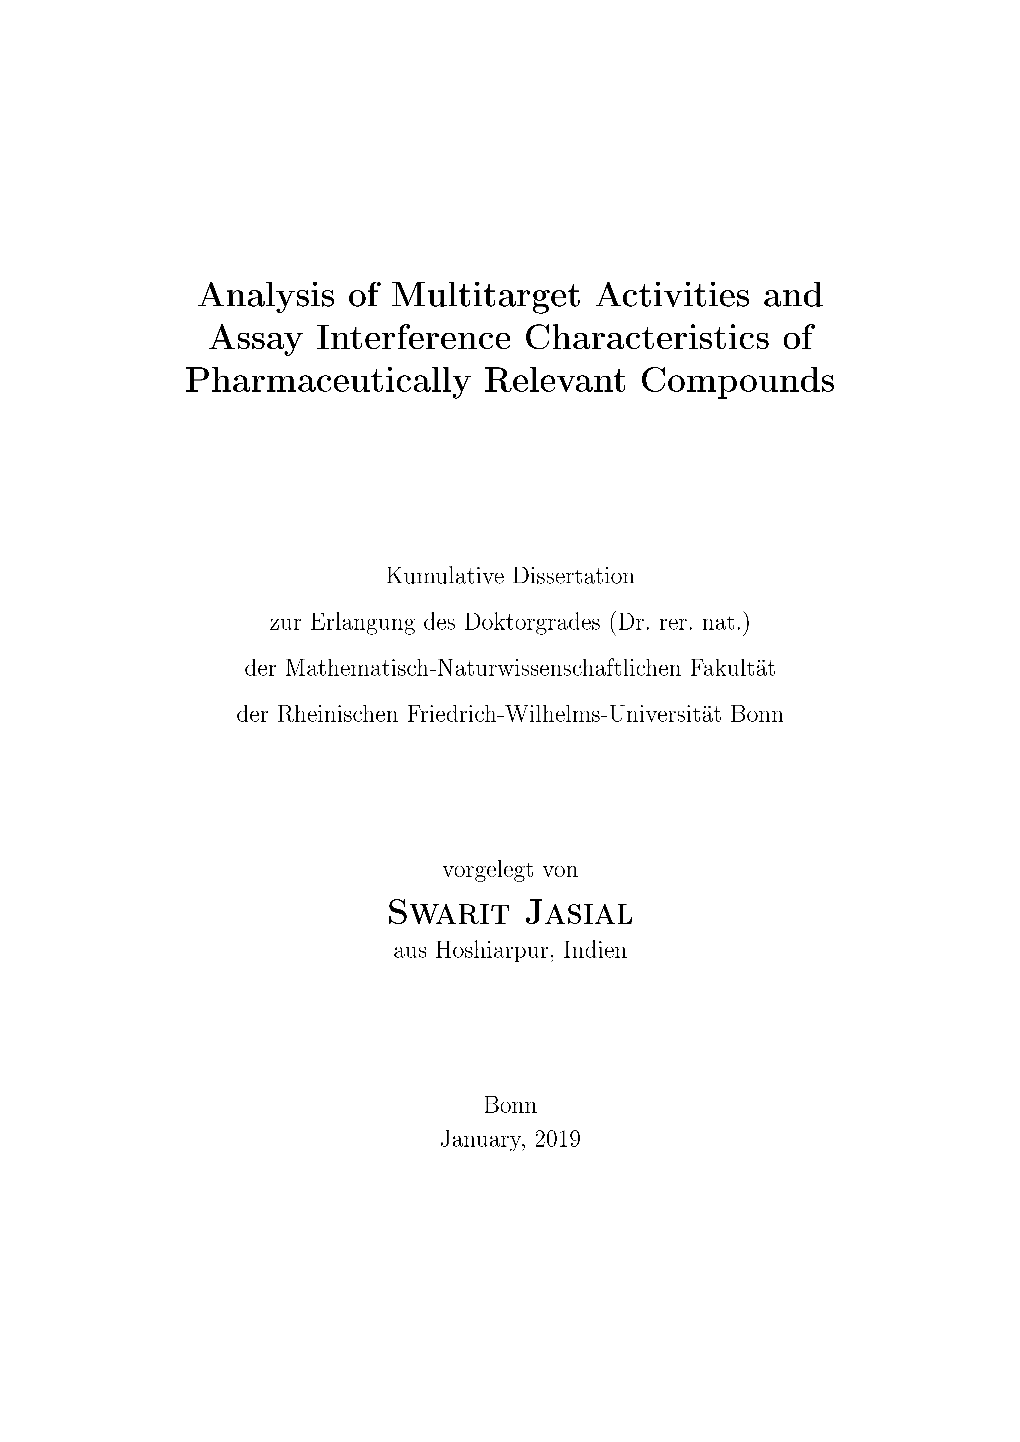 Analysis of Multitarget Activities and Assay Interference Characteristics of Pharmaceutically Relevant Compounds